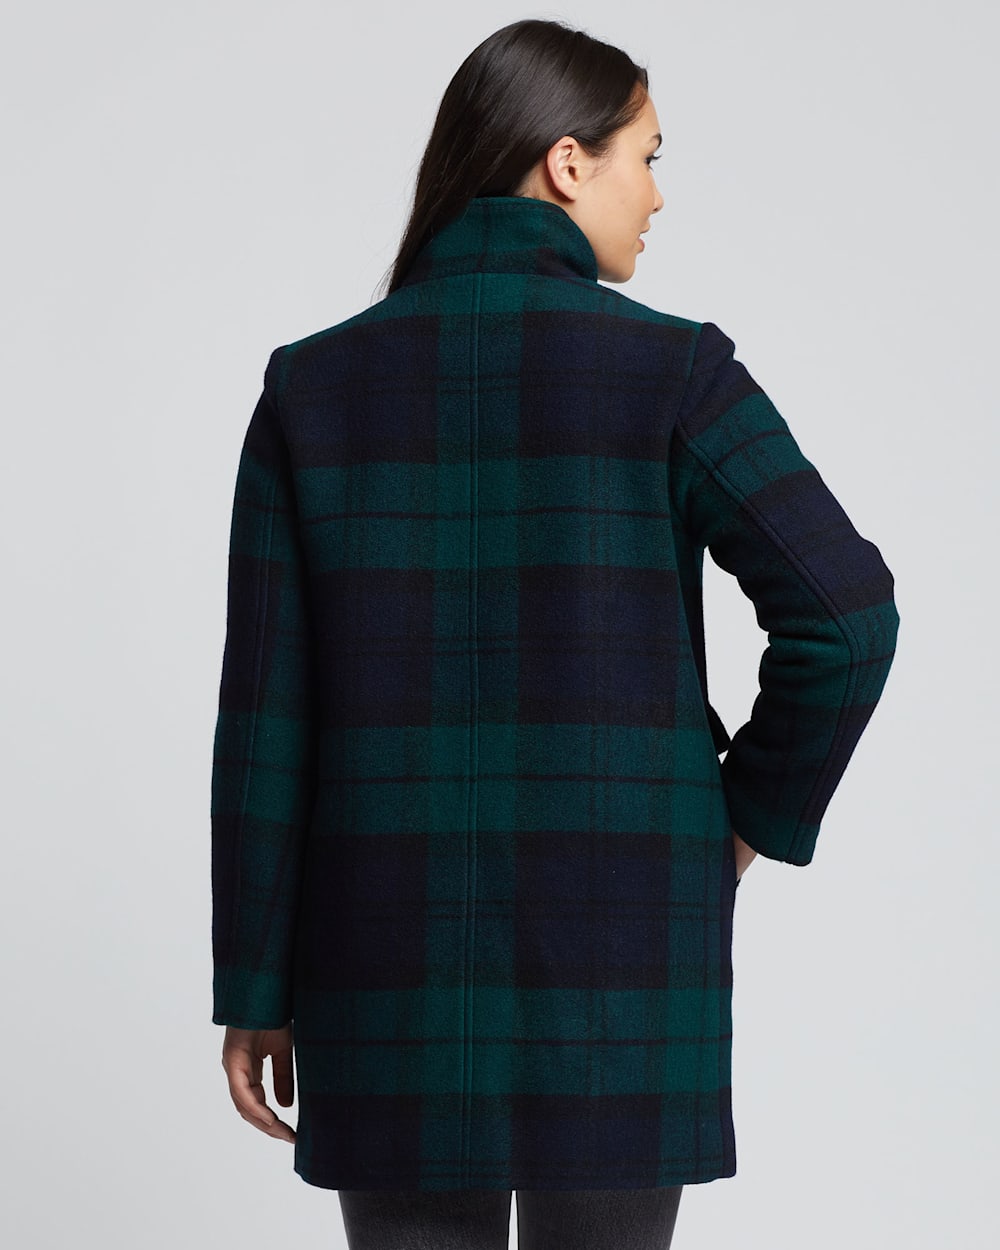 ALTERNATE VIEW OF WOMEN'S CAMDEN TOPPER COAT IN BLACK WATCH PLAID image number 3